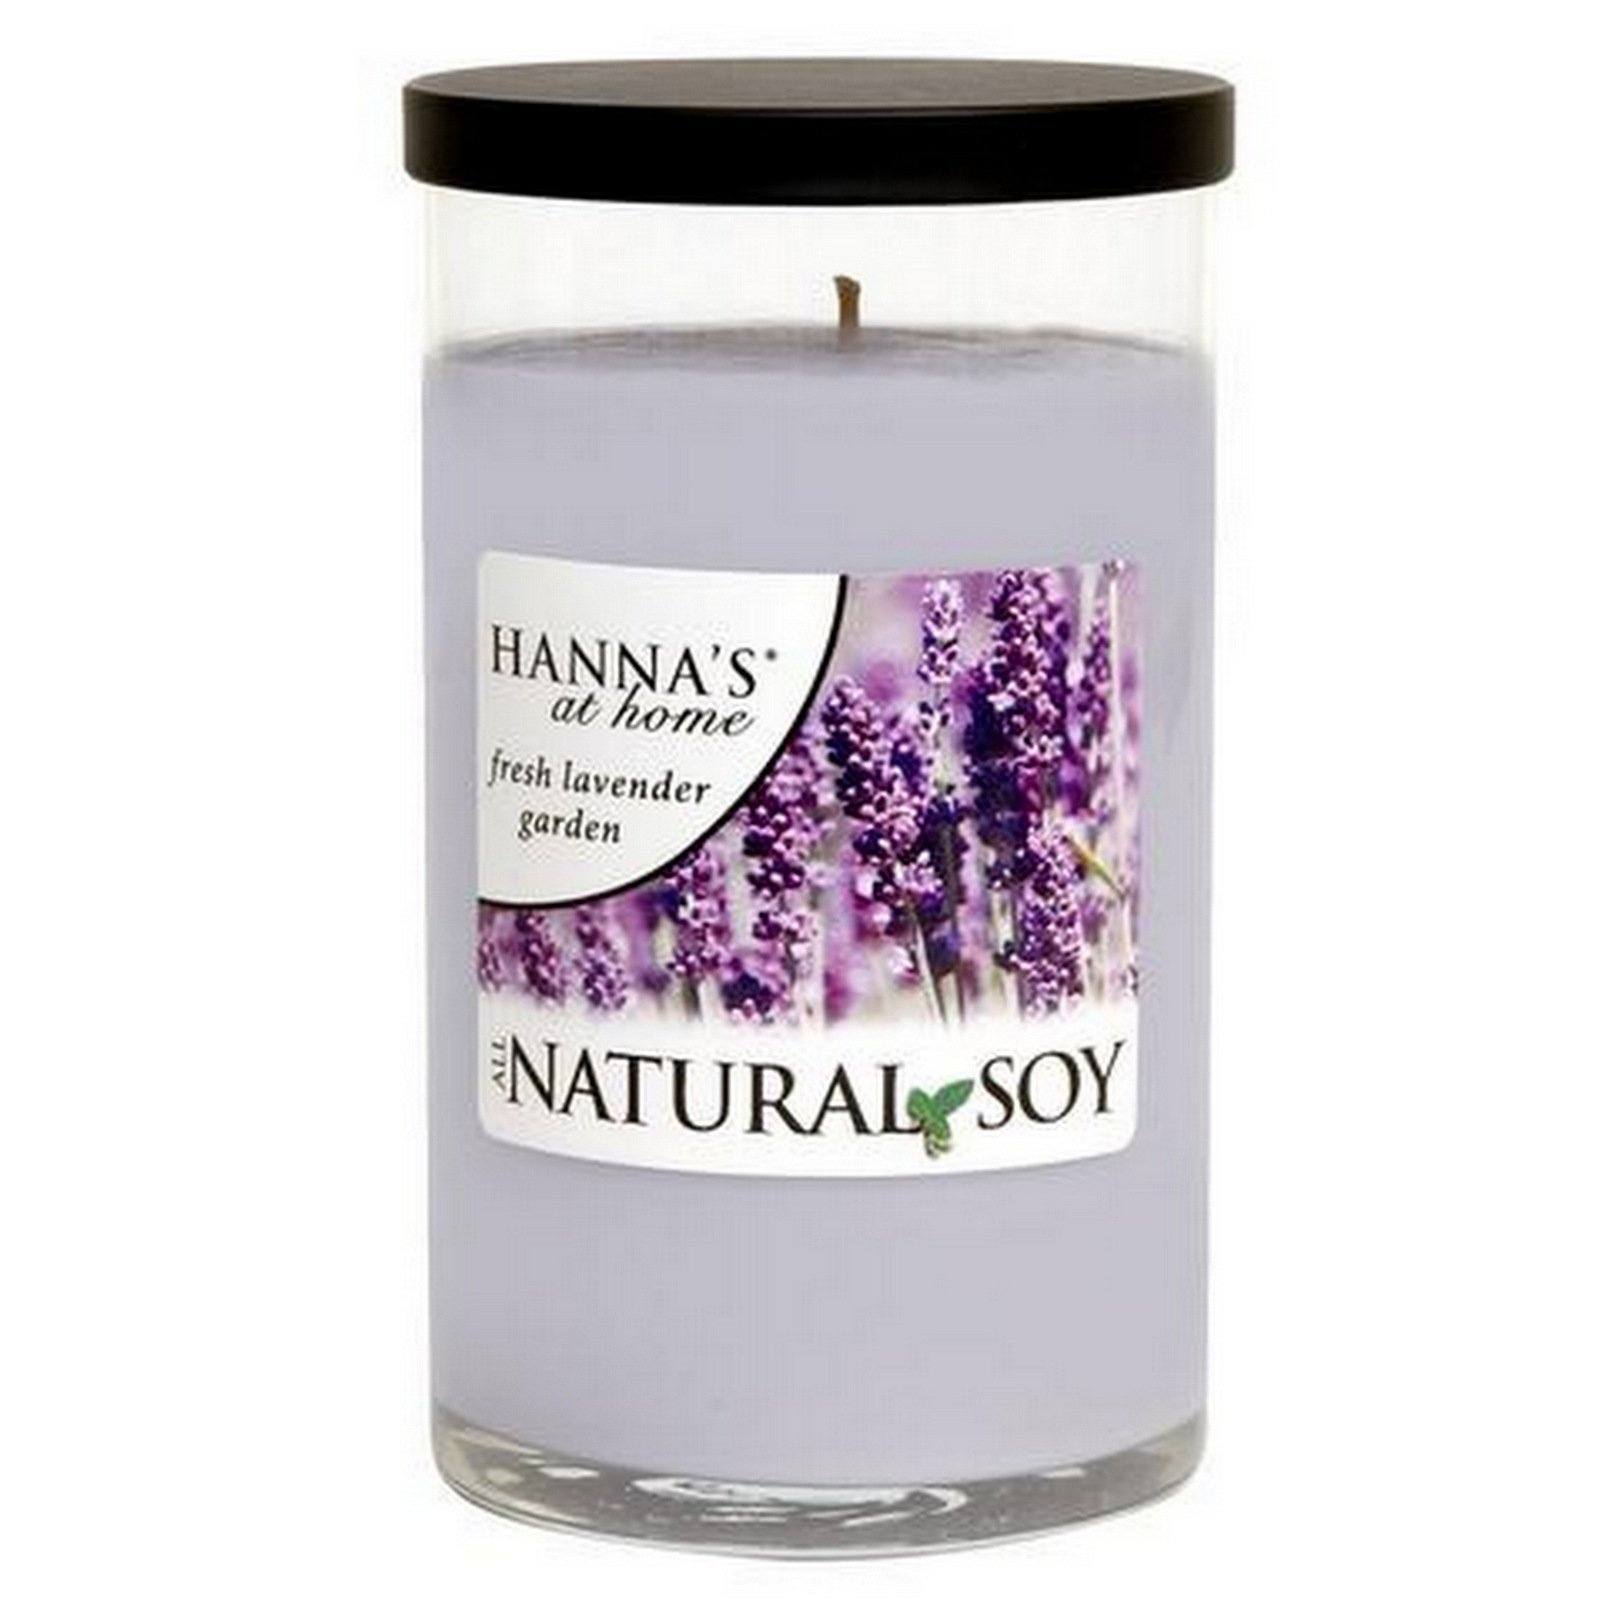 Buy Natural Soy Fresh Lavender Garden Scented Soy Candle at ...